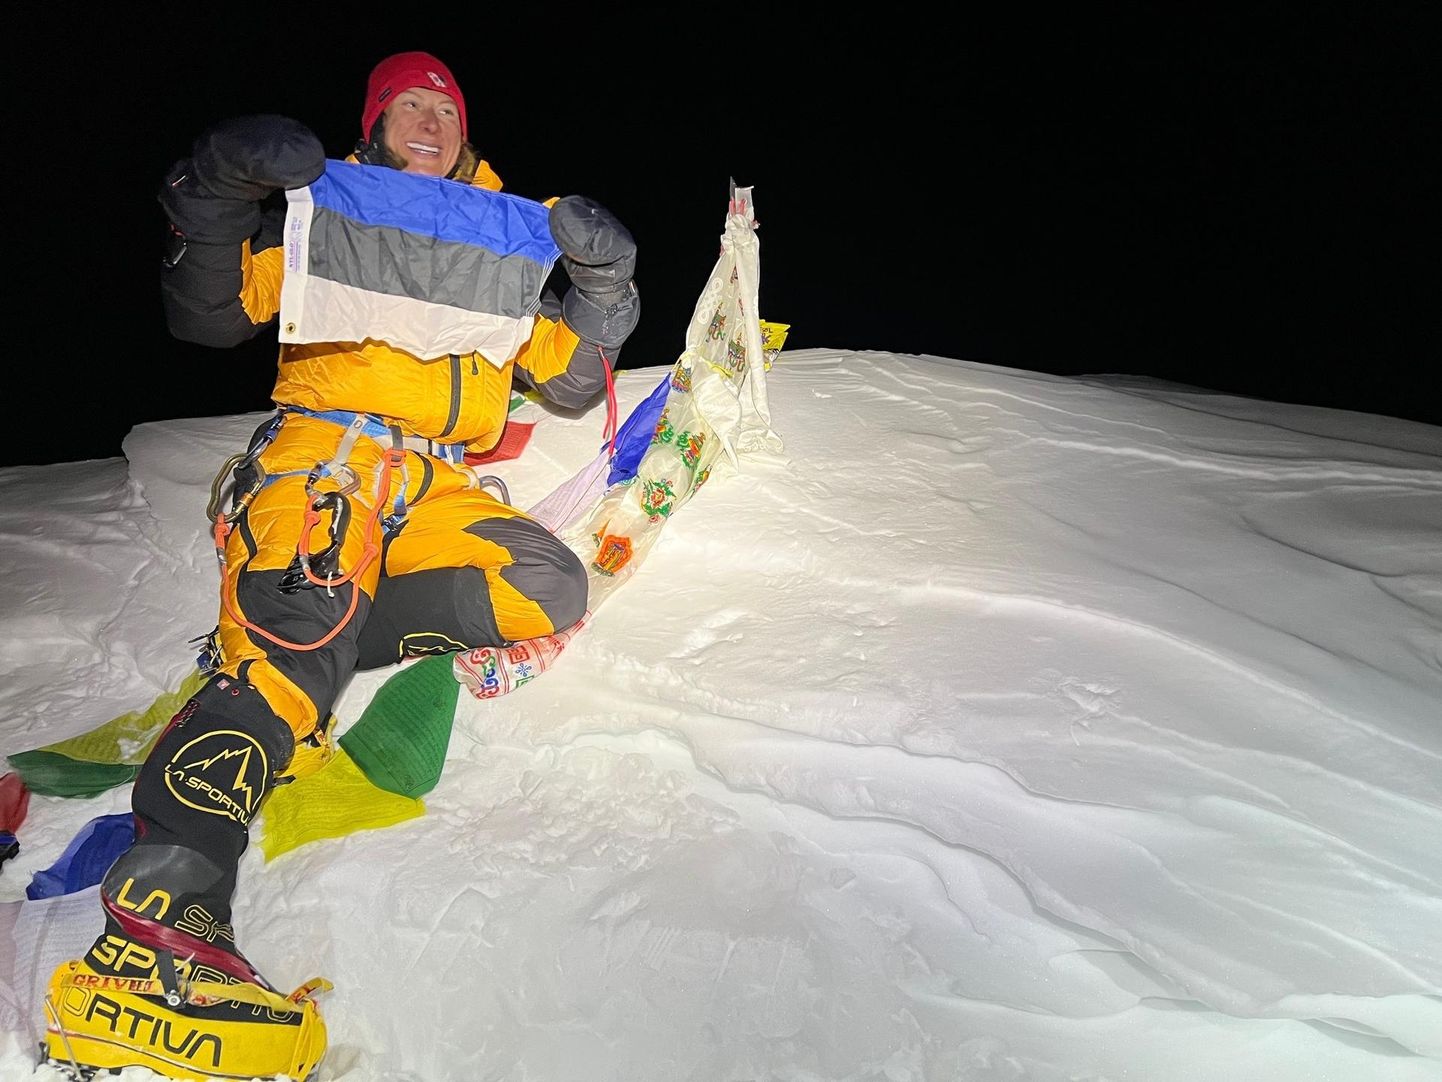 Krisli Melesk was the second Estonian after Andras Kaasik to carry the Estonian tricolor to the top of K2 mountain, 8611 meters above sea level.